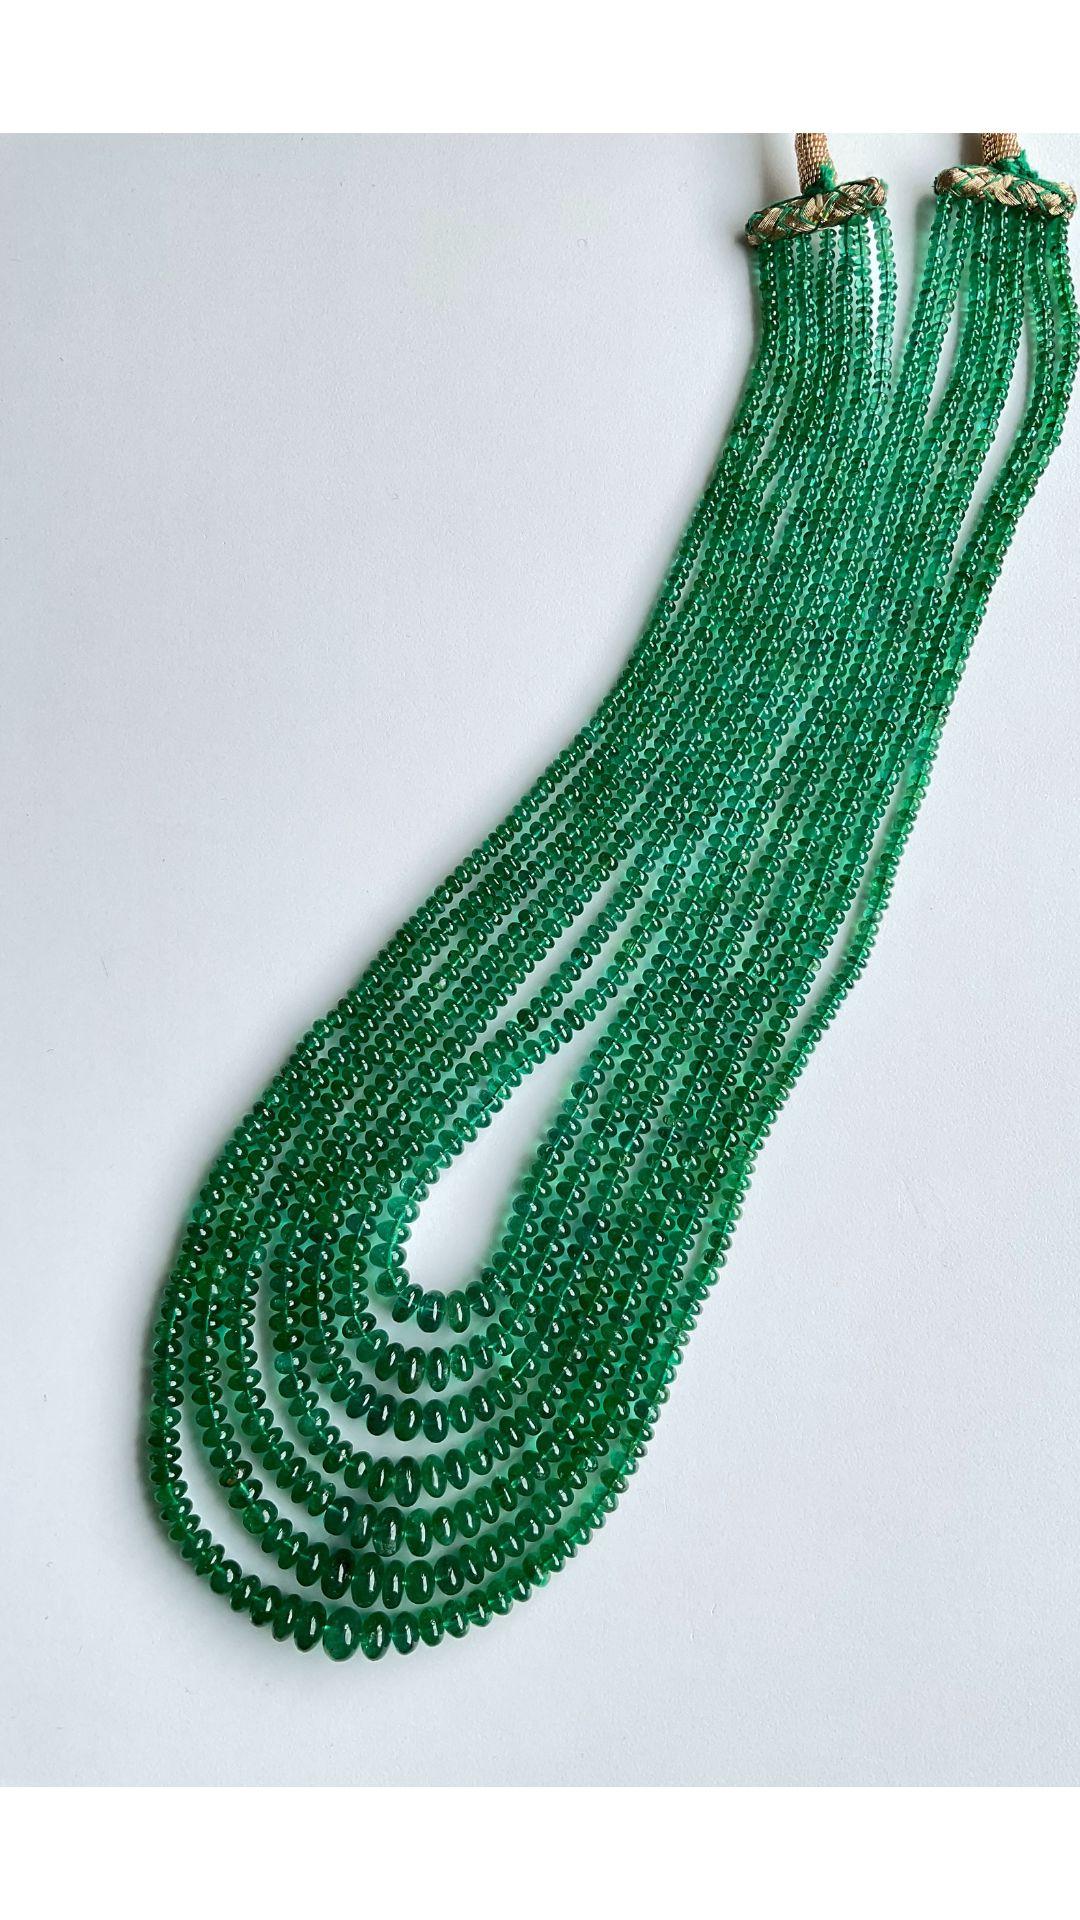 natural emerald beads necklace